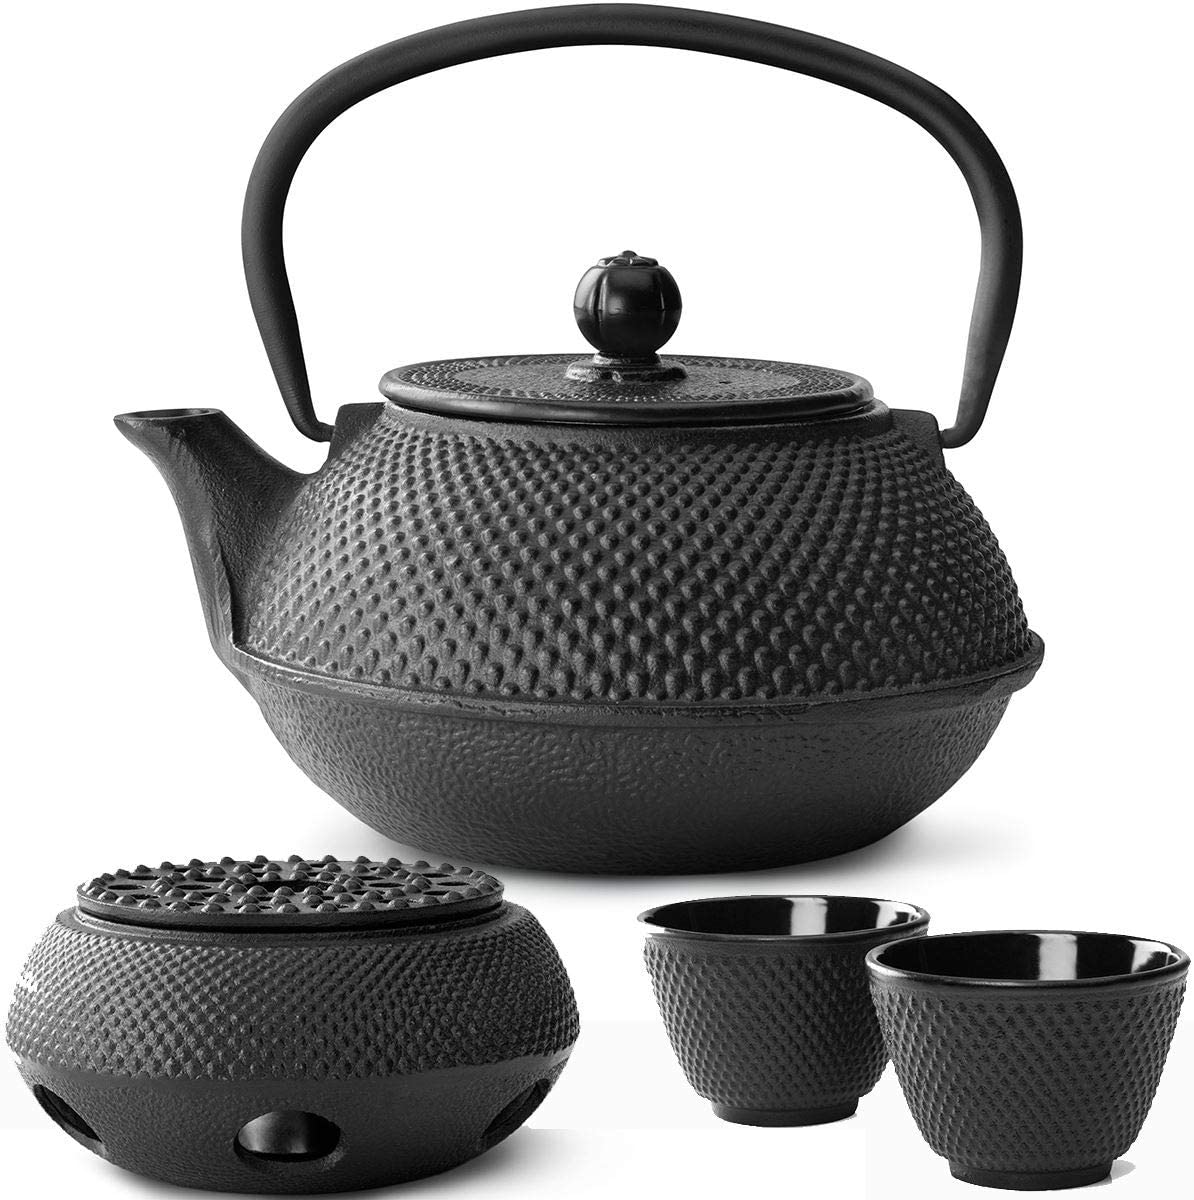 Bredemeijer Teapot Asian Cast Iron Set Black 0.8 Litres with Tea Filter Strainer with Warmer and Tea Cup (2 Cups) Black